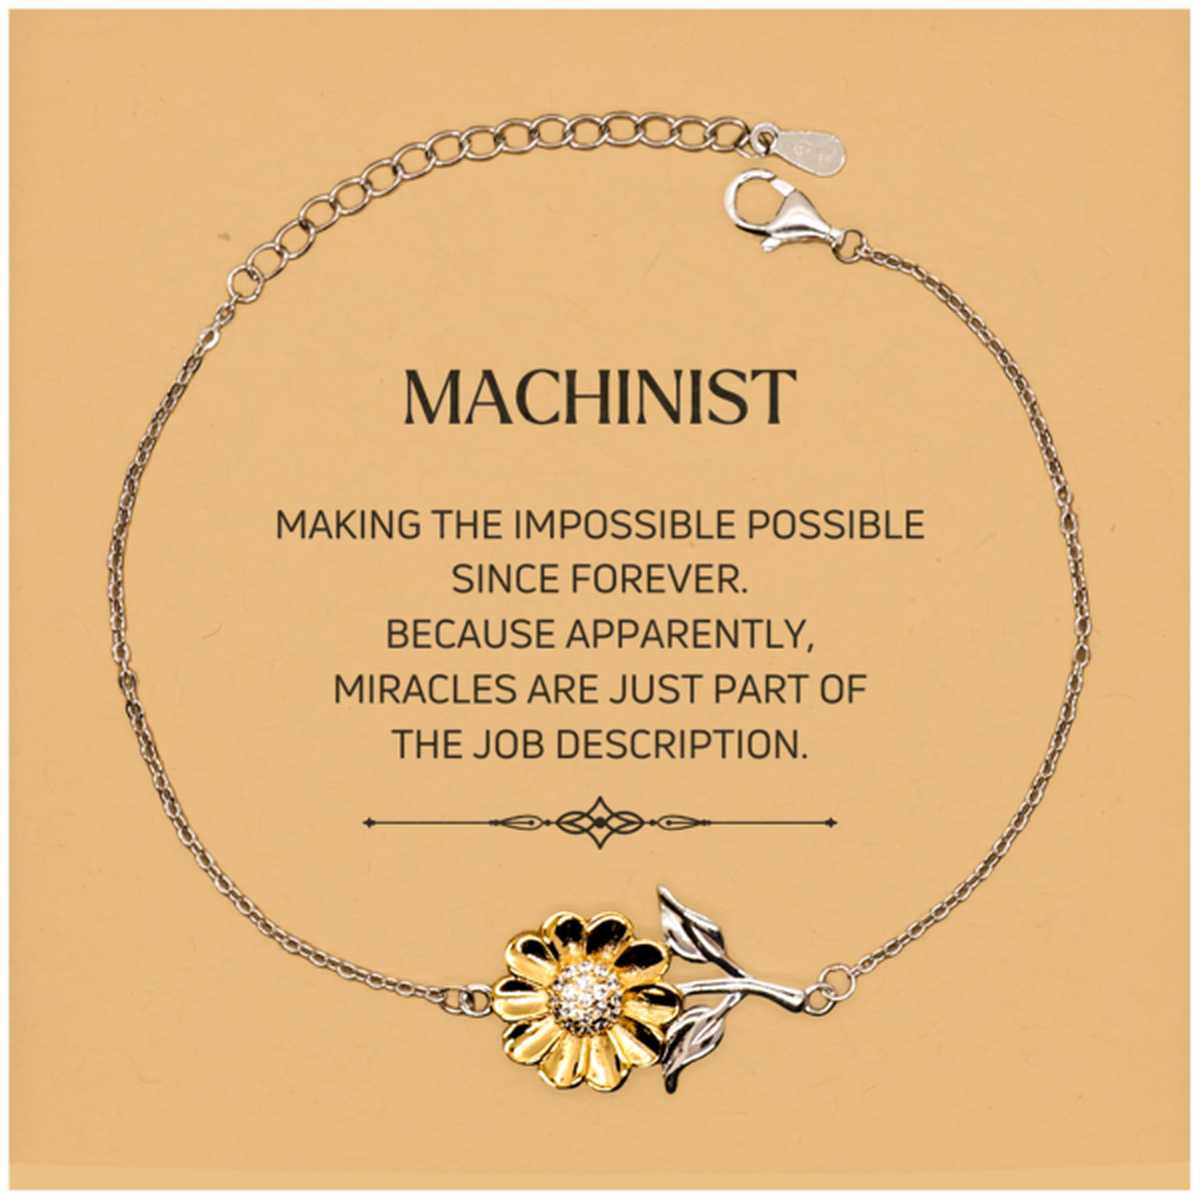 Funny Machinist Gifts, Miracles are just part of the job description, Inspirational Birthday Christmas Sunflower Bracelet For Machinist, Men, Women, Coworkers, Friends, Boss